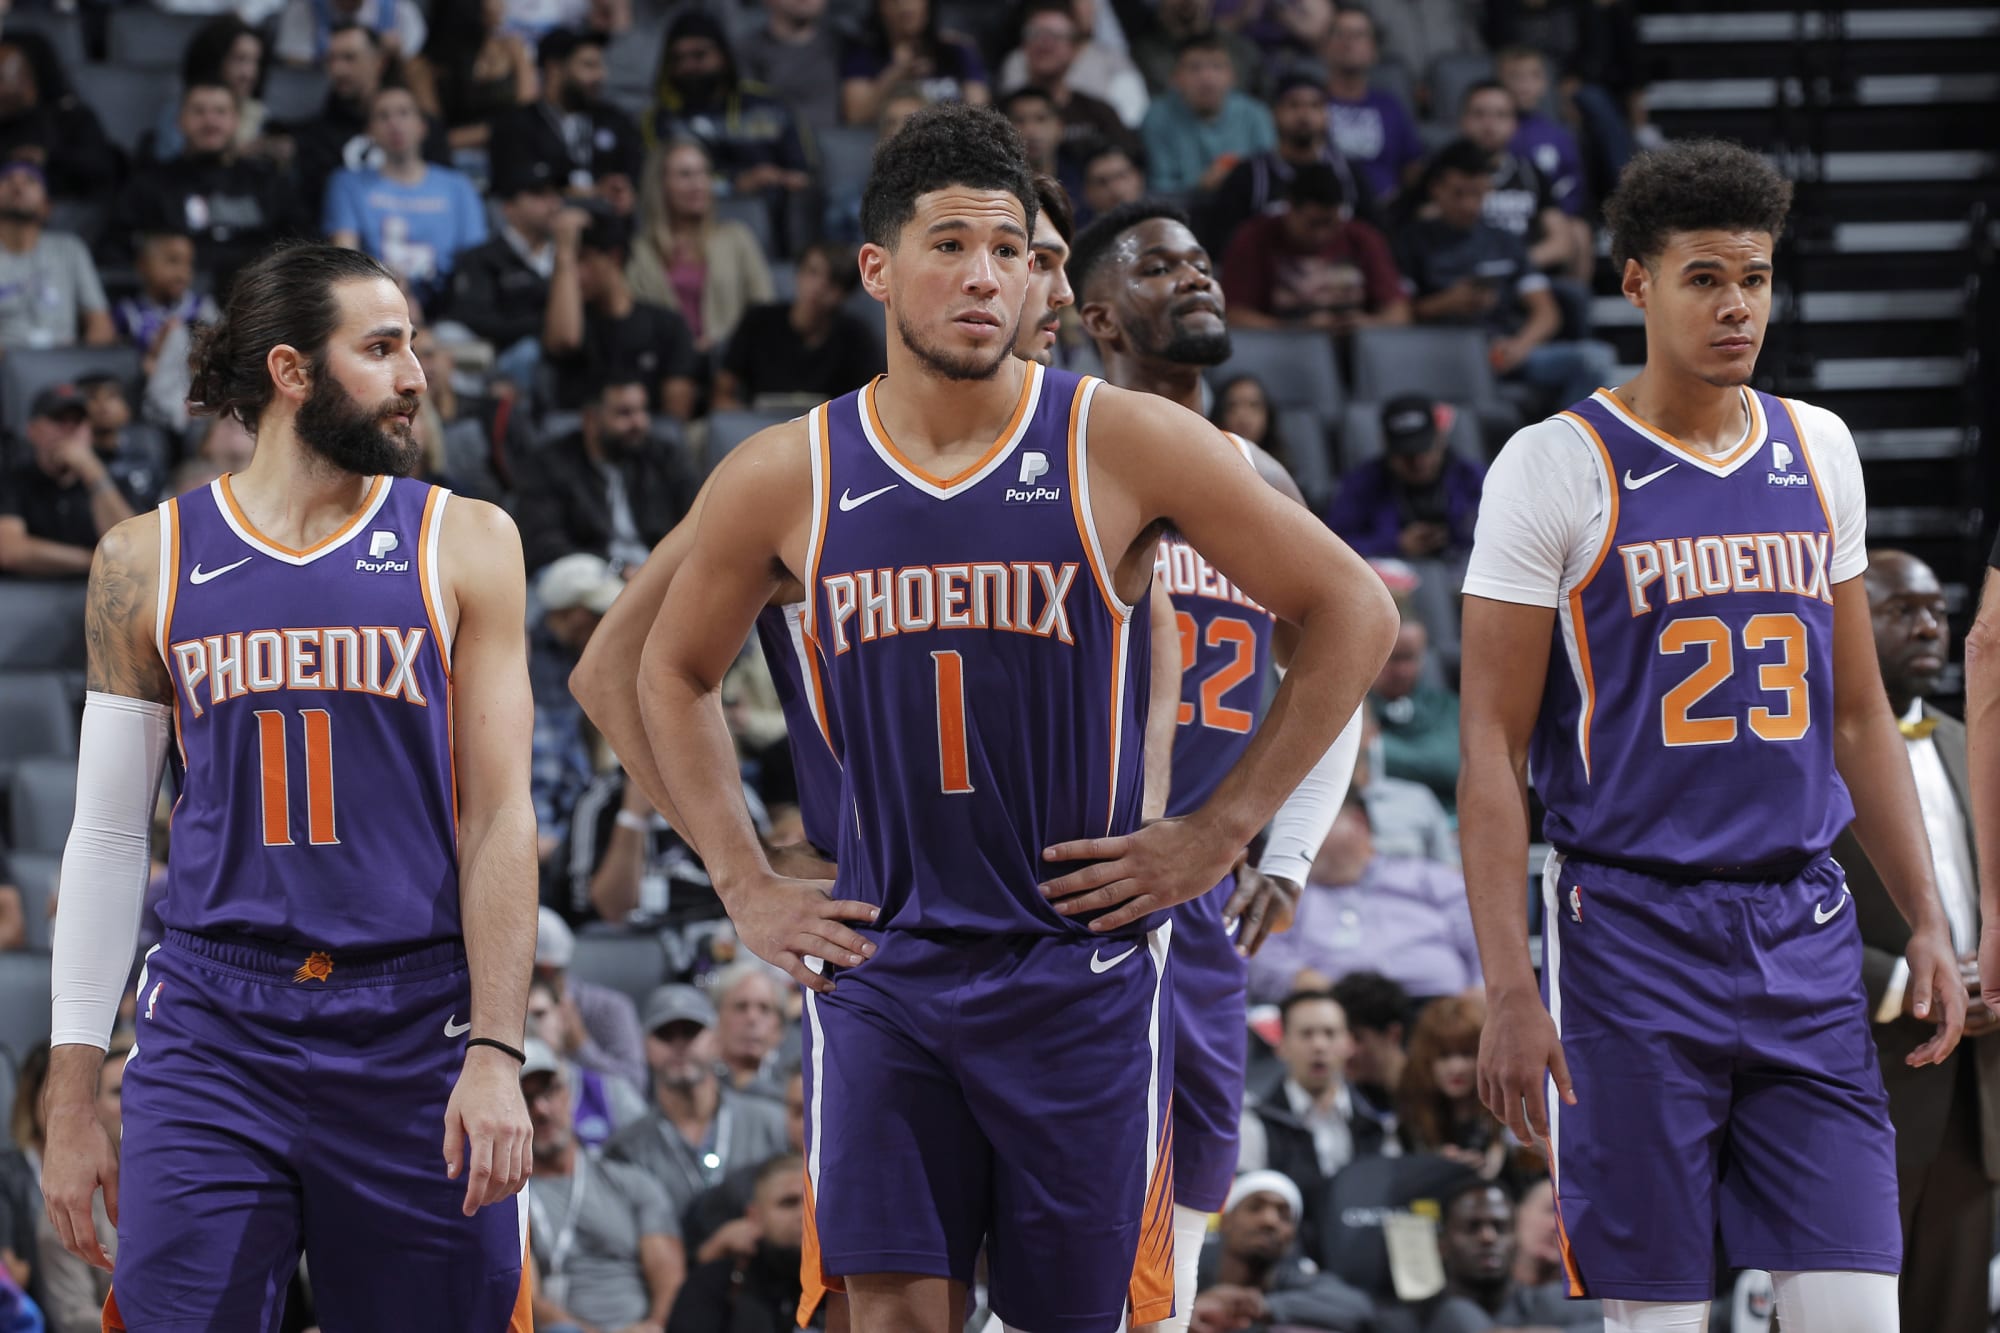 The Phoenix Suns' projected starters had a very bad preseason